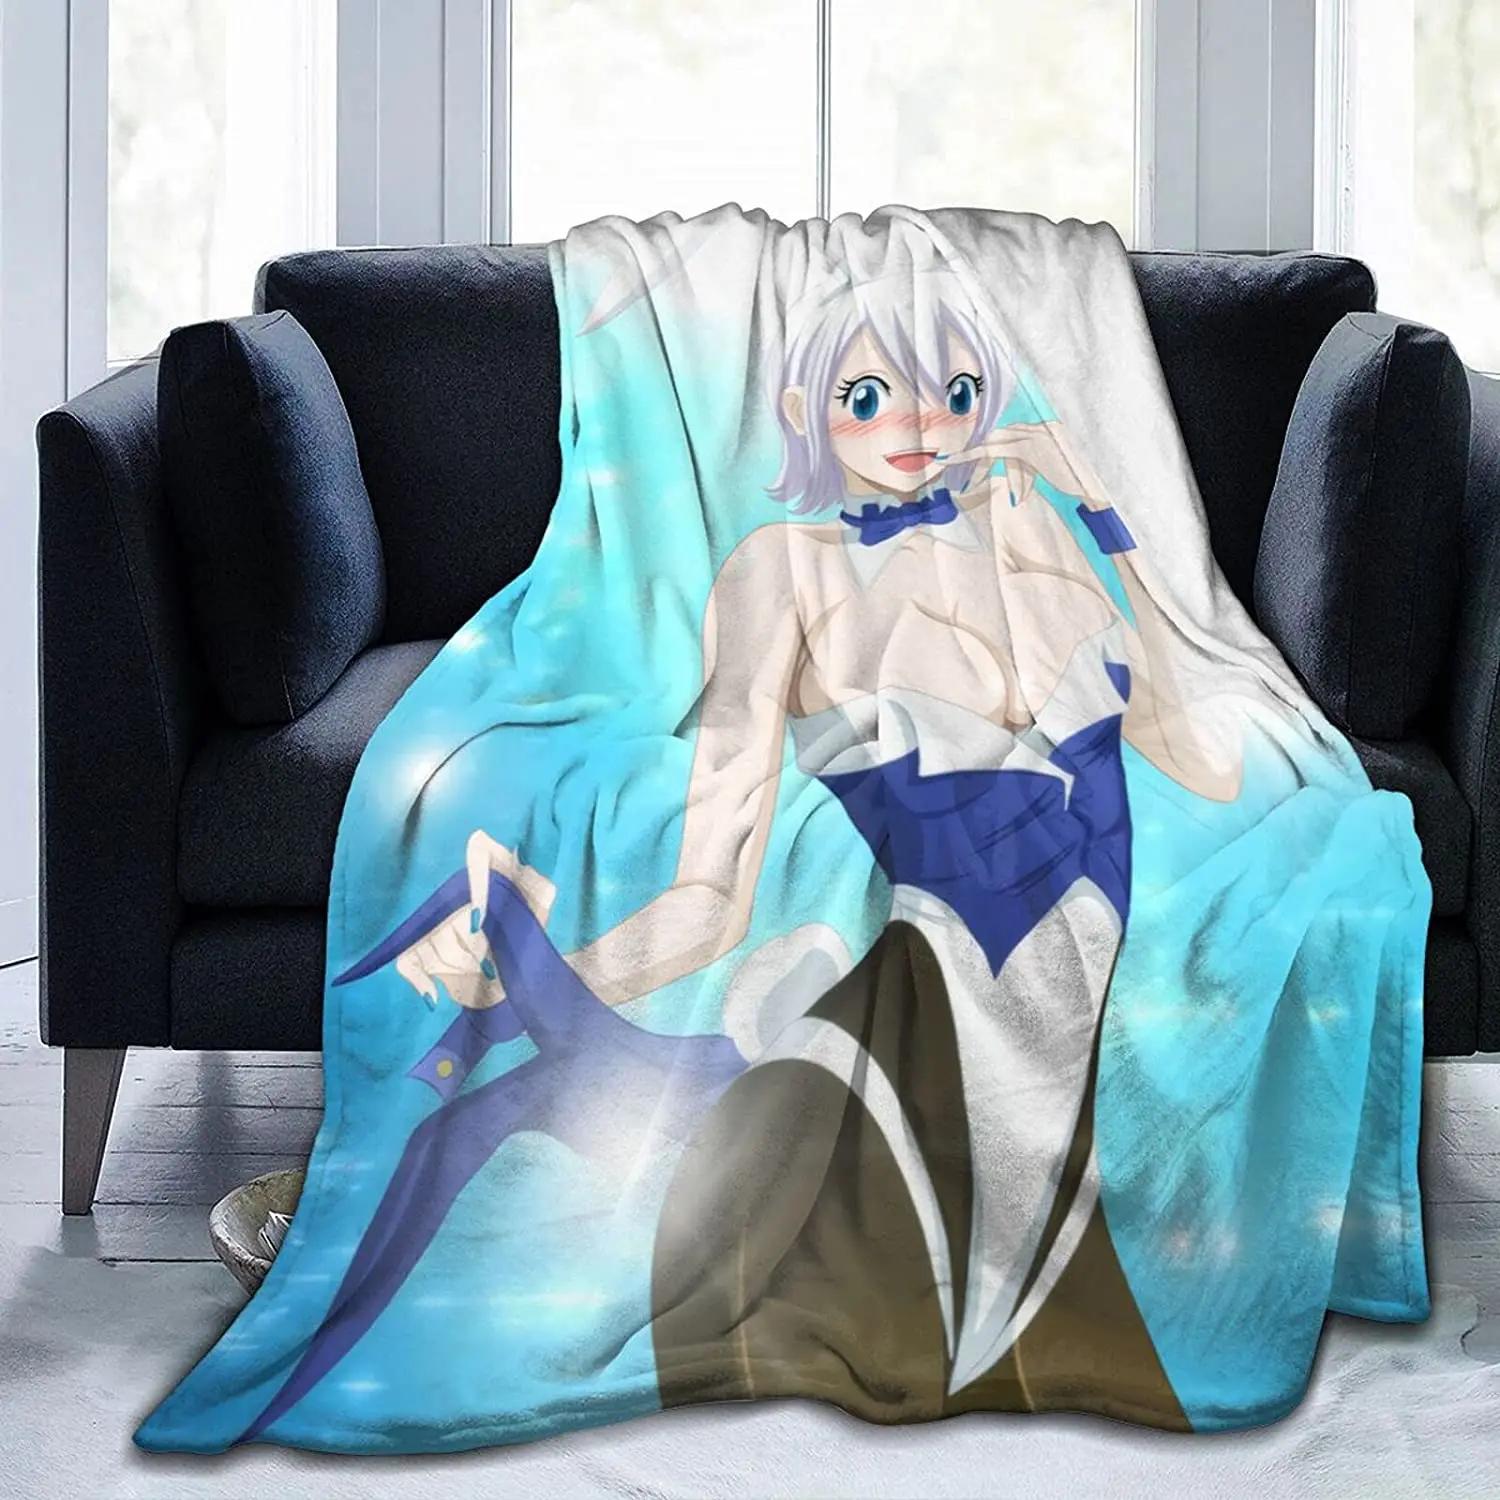 

Lisanna Strauss Fluffy Soft and Comfortable Blanket, Anime Warm Embrace of Sympathy